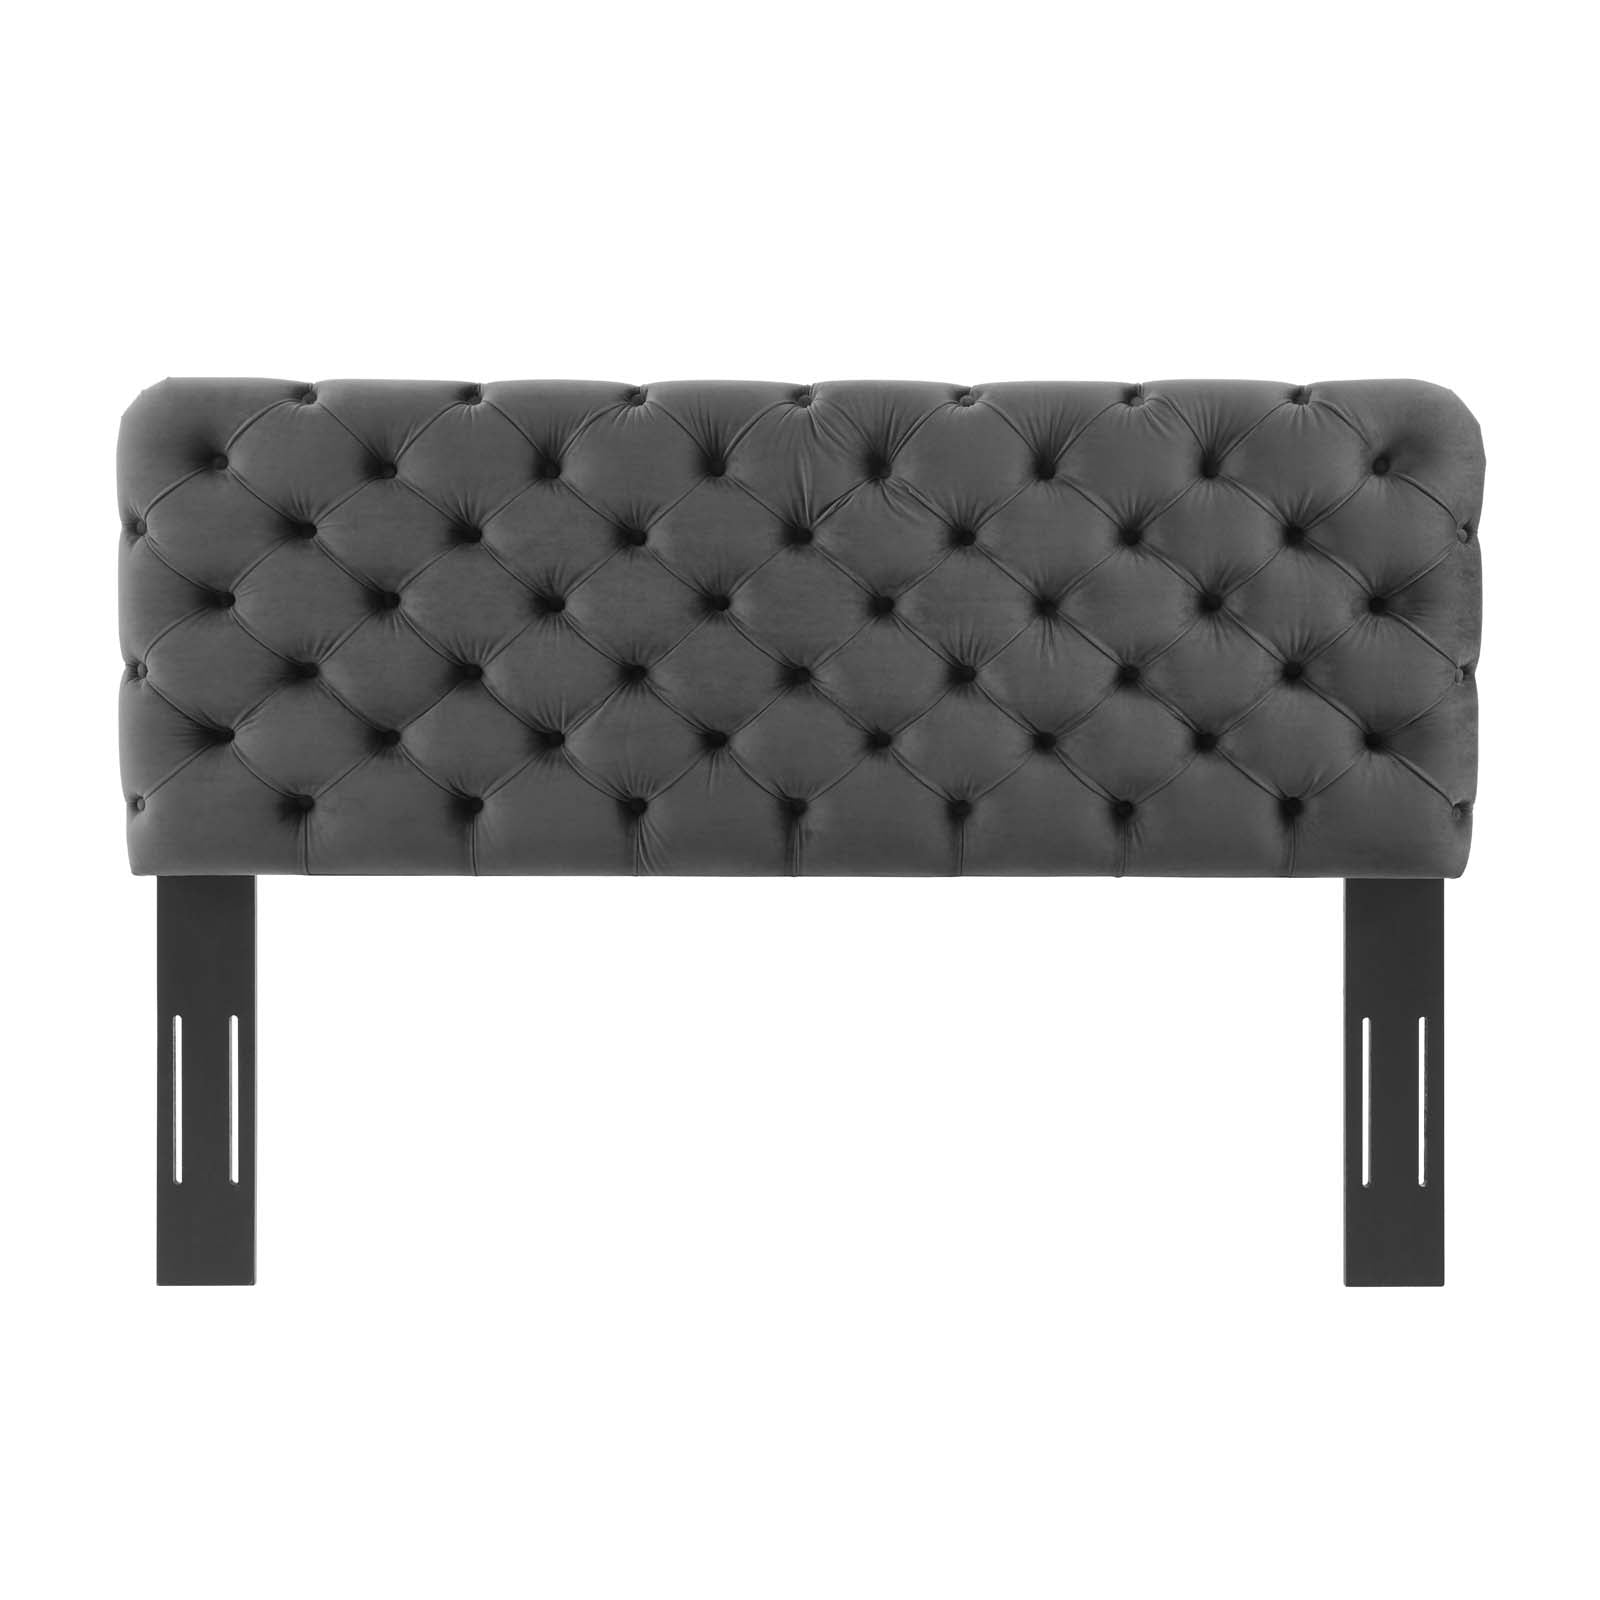 Modway Headboards - Lizzy Tufted Full/Queen Performance Velvet Headboard Charcoal